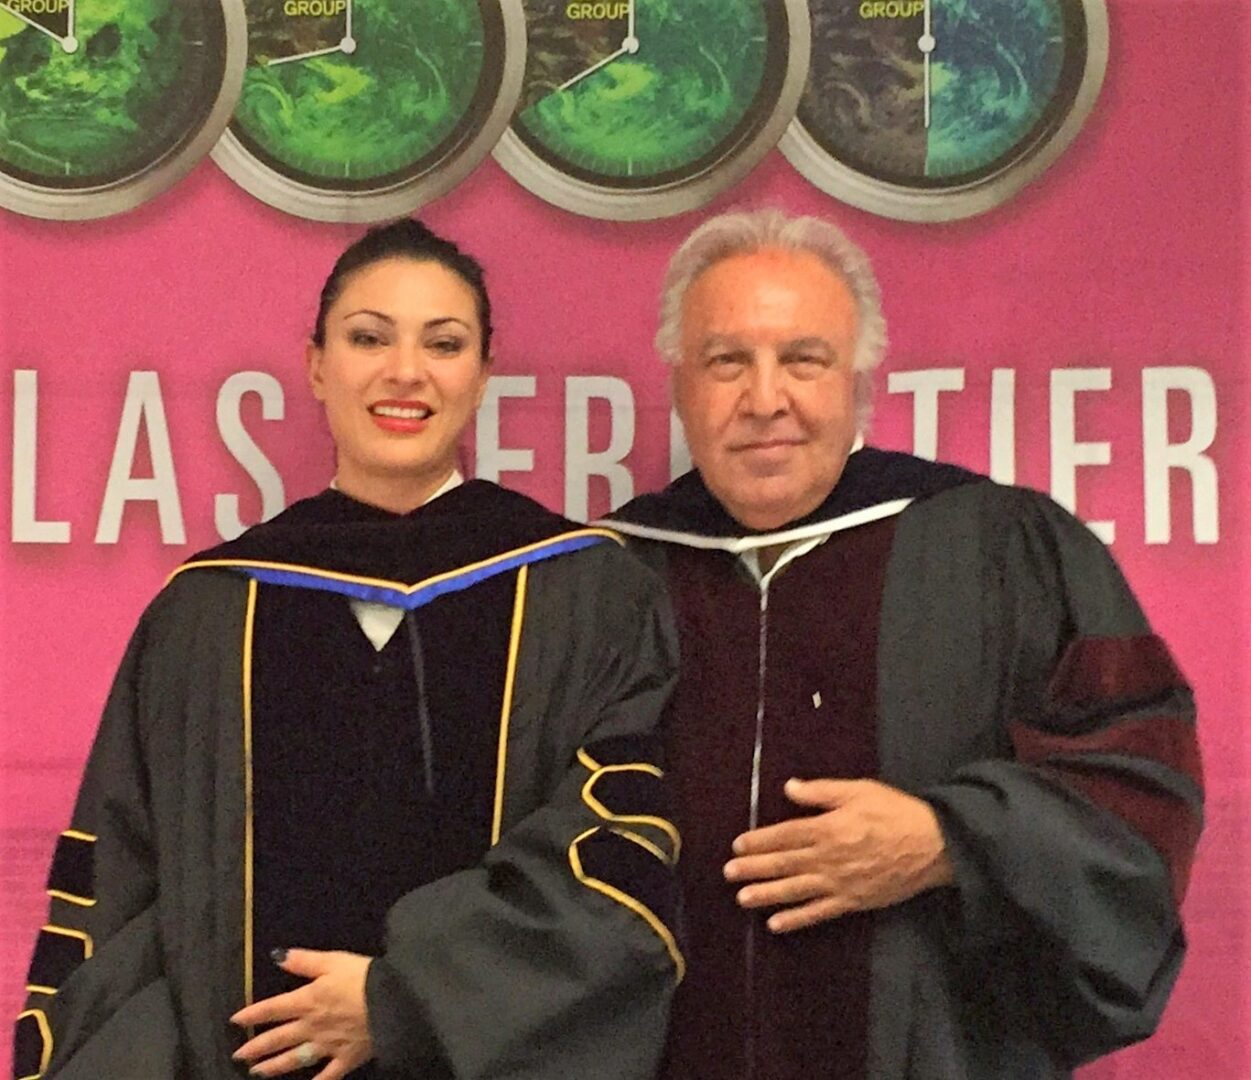 Two people in graduation gowns posing for a picture.